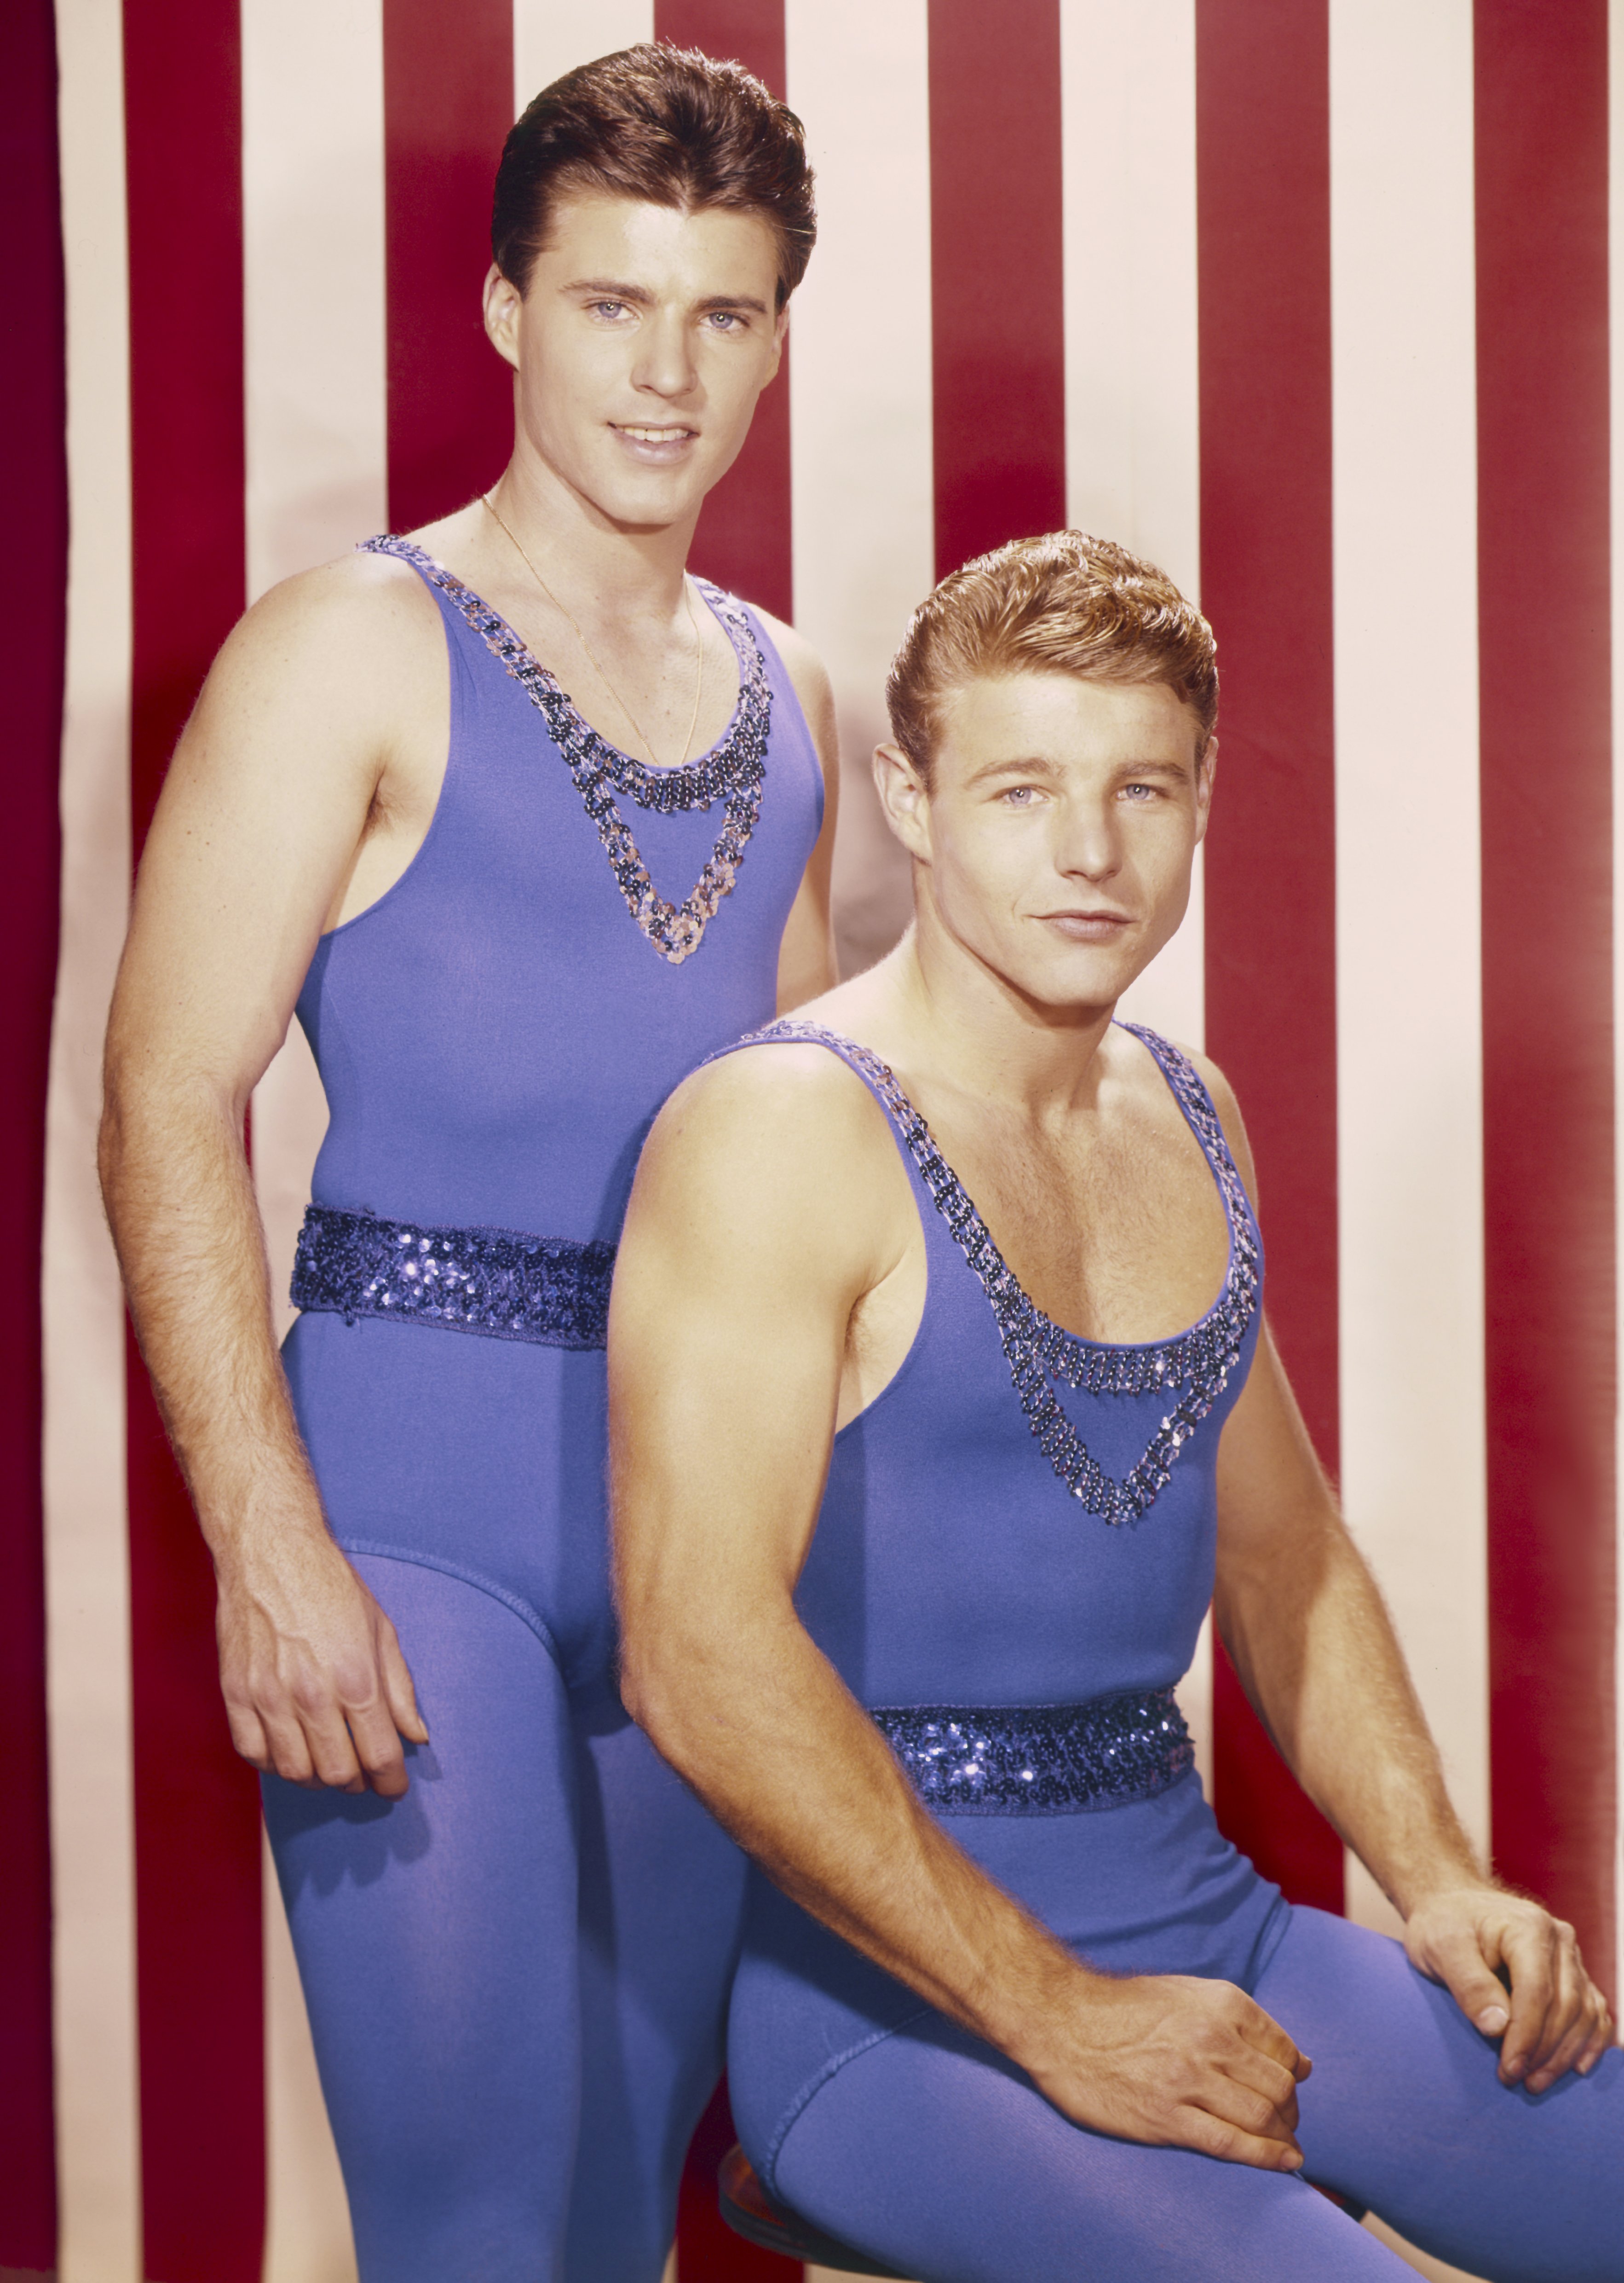 Ricky and David Nelsonpose in circus wear circa 1960 | Source: Getty Images